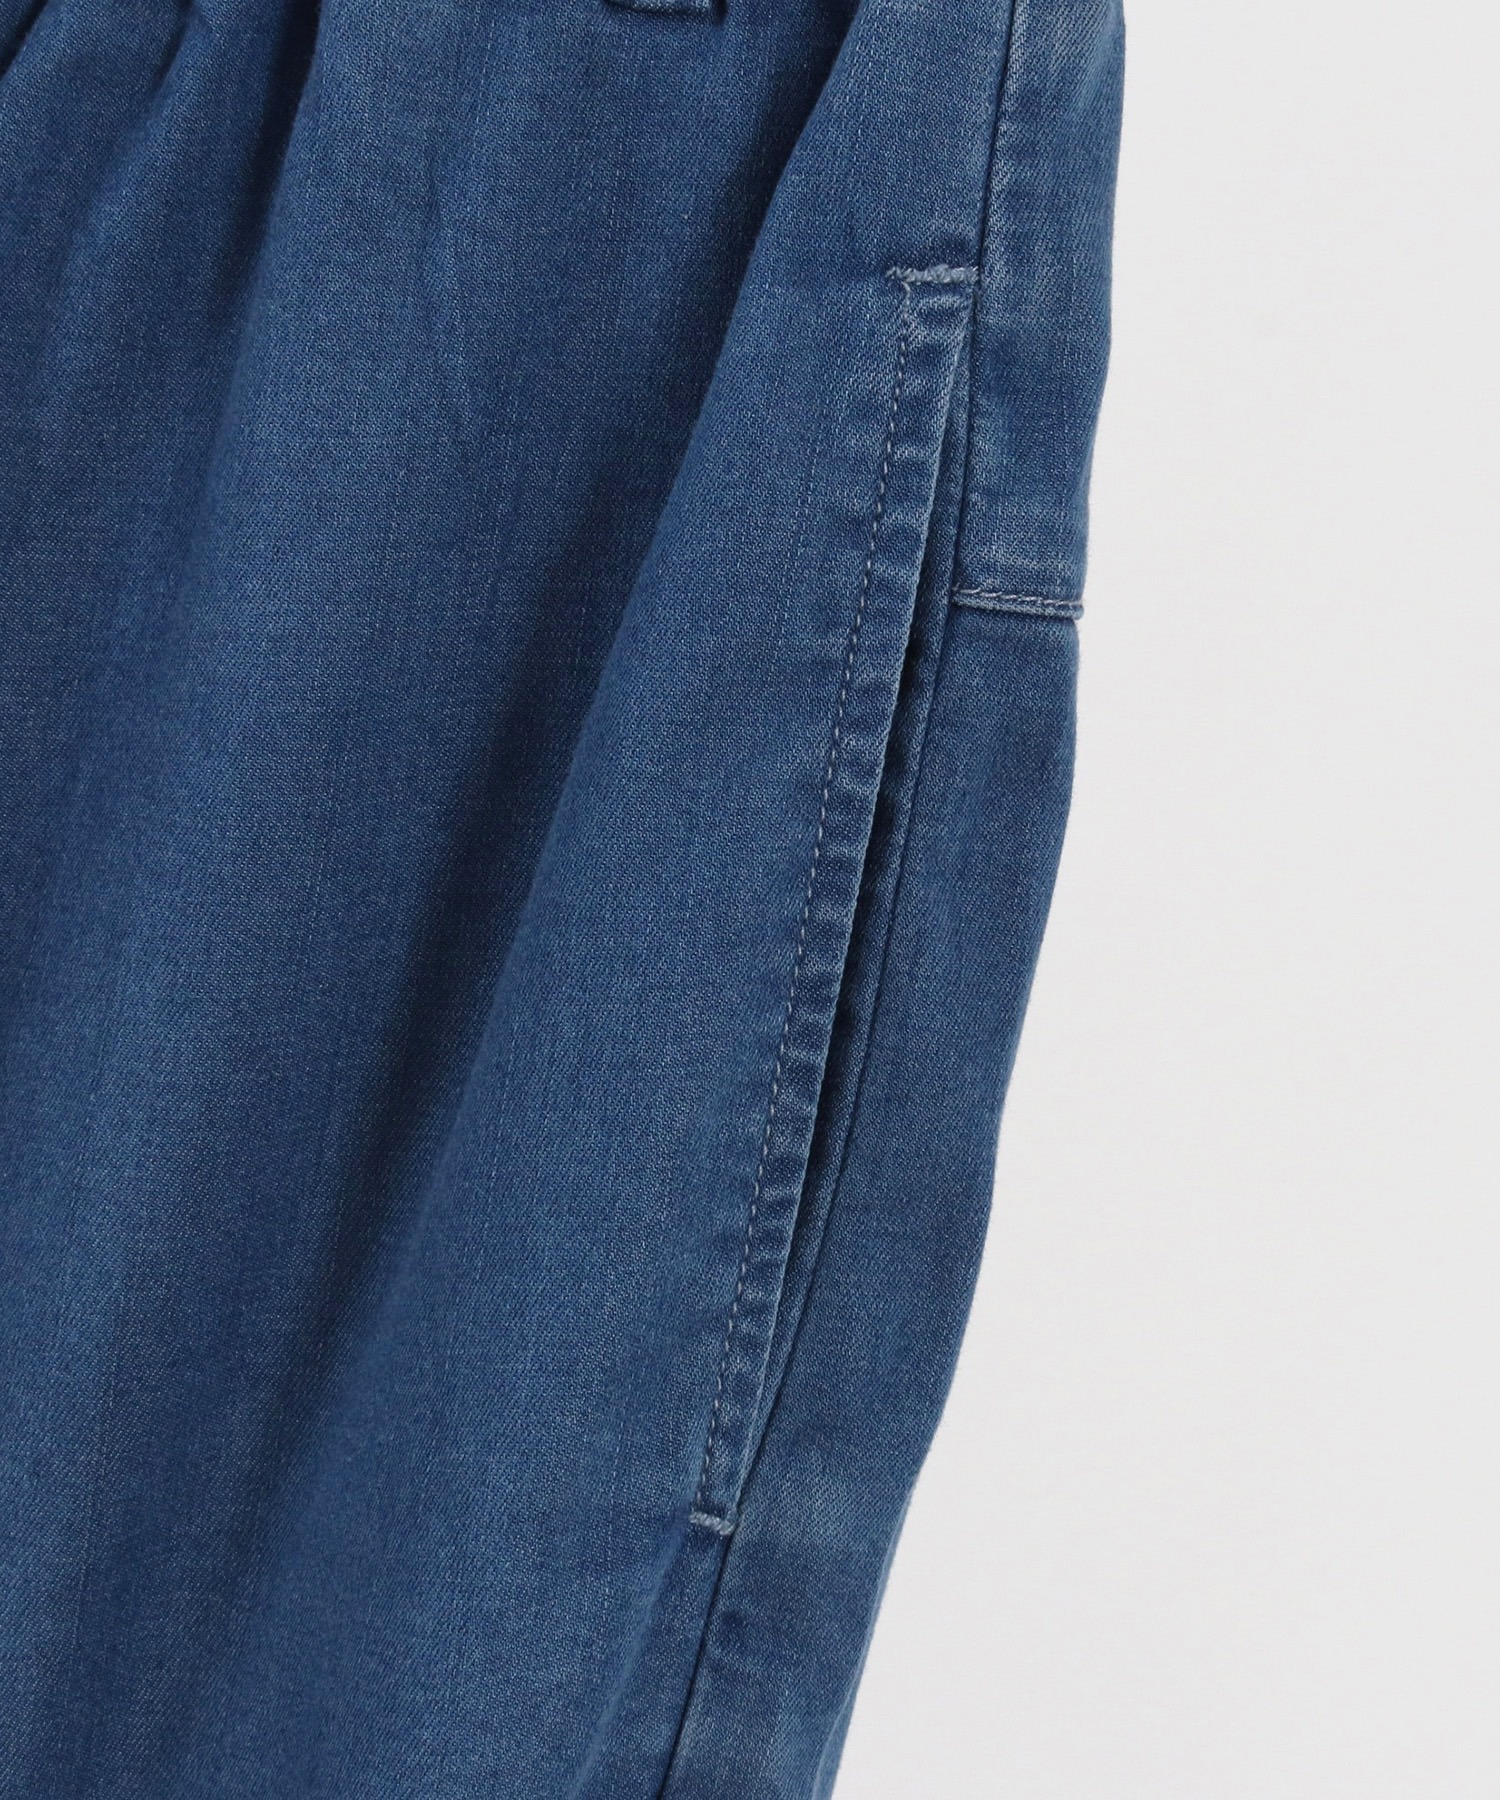 SALE／90%OFF】 CAMBIOmp9699-Soft Chambray Easy Balloon Silhouette Pants パンツ  urbantuning.es